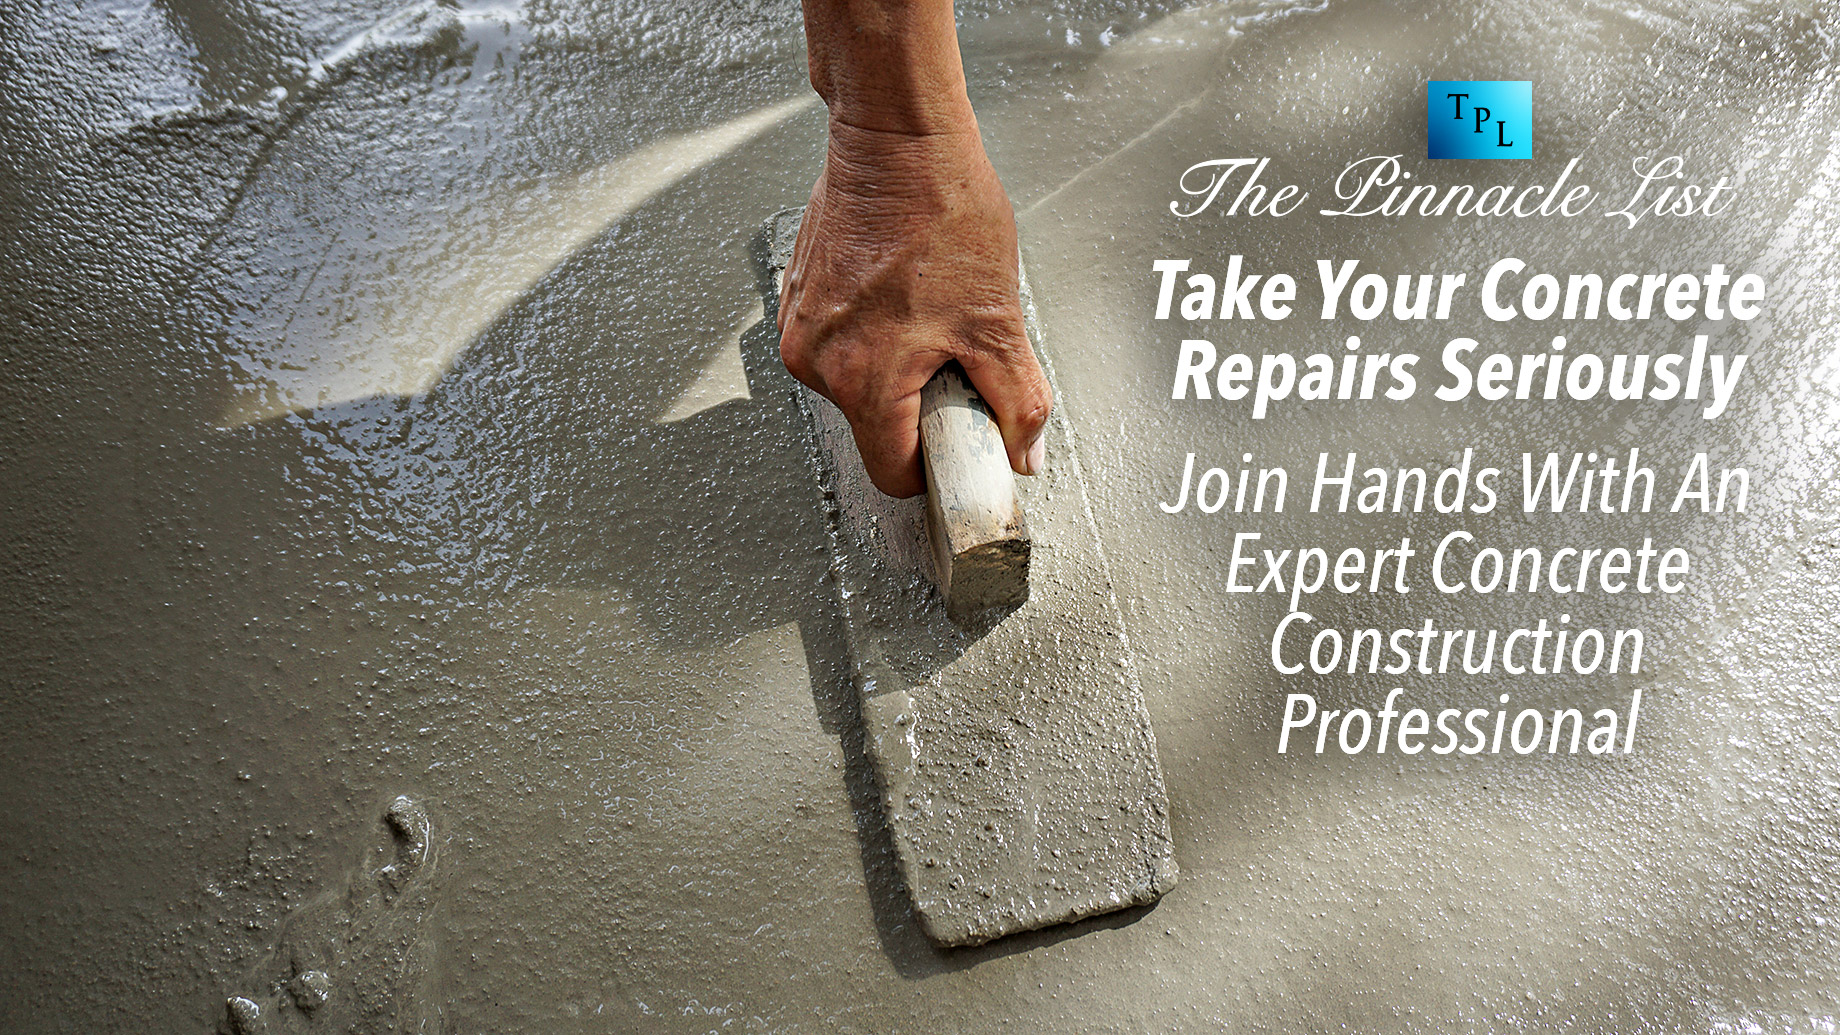 Take Your Concrete Repairs Seriously - Join Hands With An Expert Concrete Construction Professional